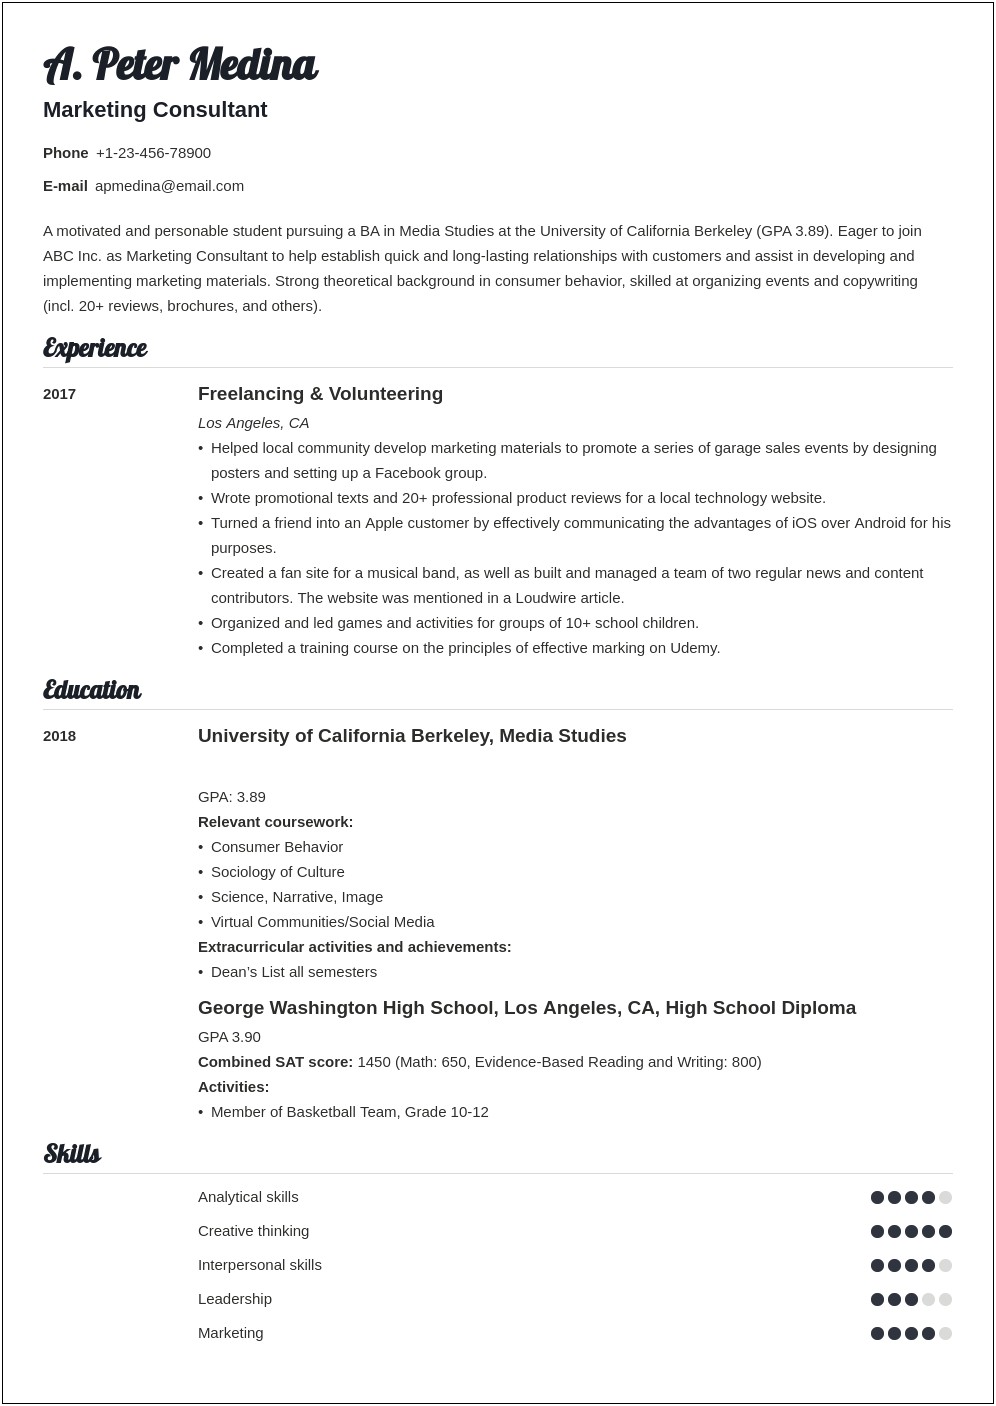 Professional Summary For Resume With No Experience Examples